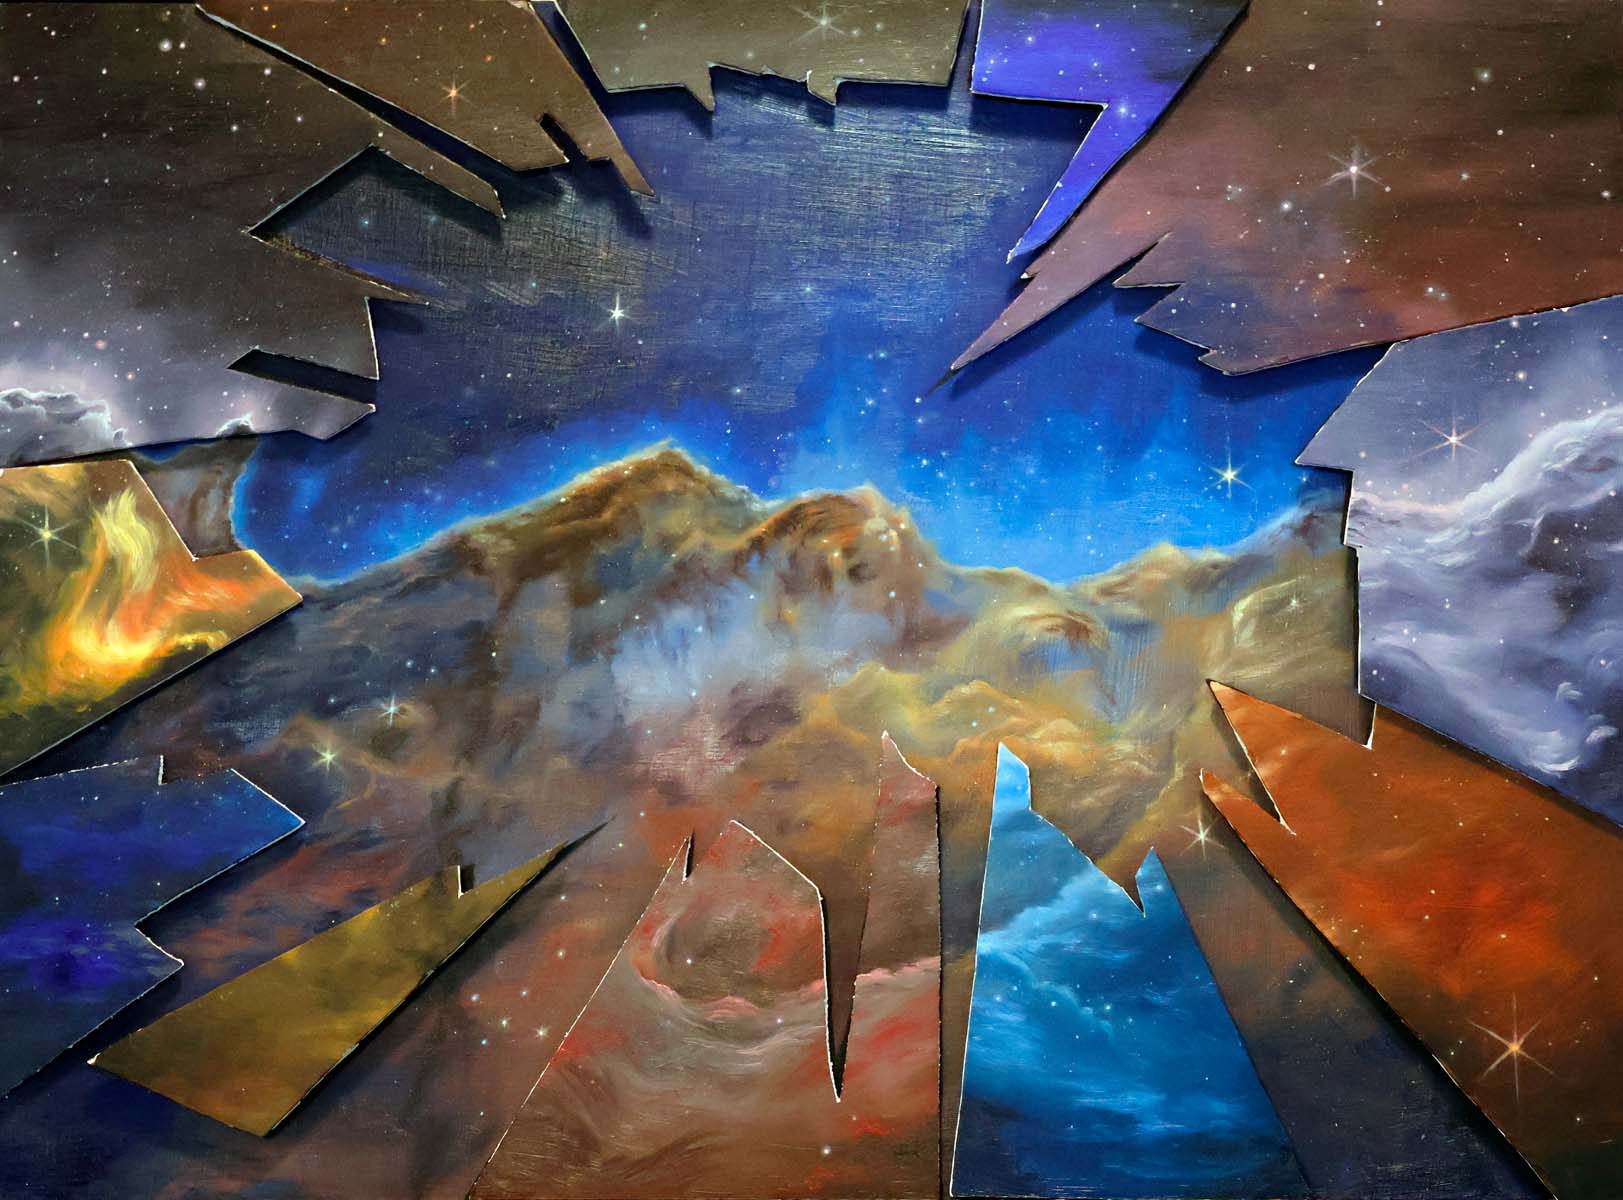 An oil painting of the cosmic cliffs image with shards of 3-dimensional areas layered on top